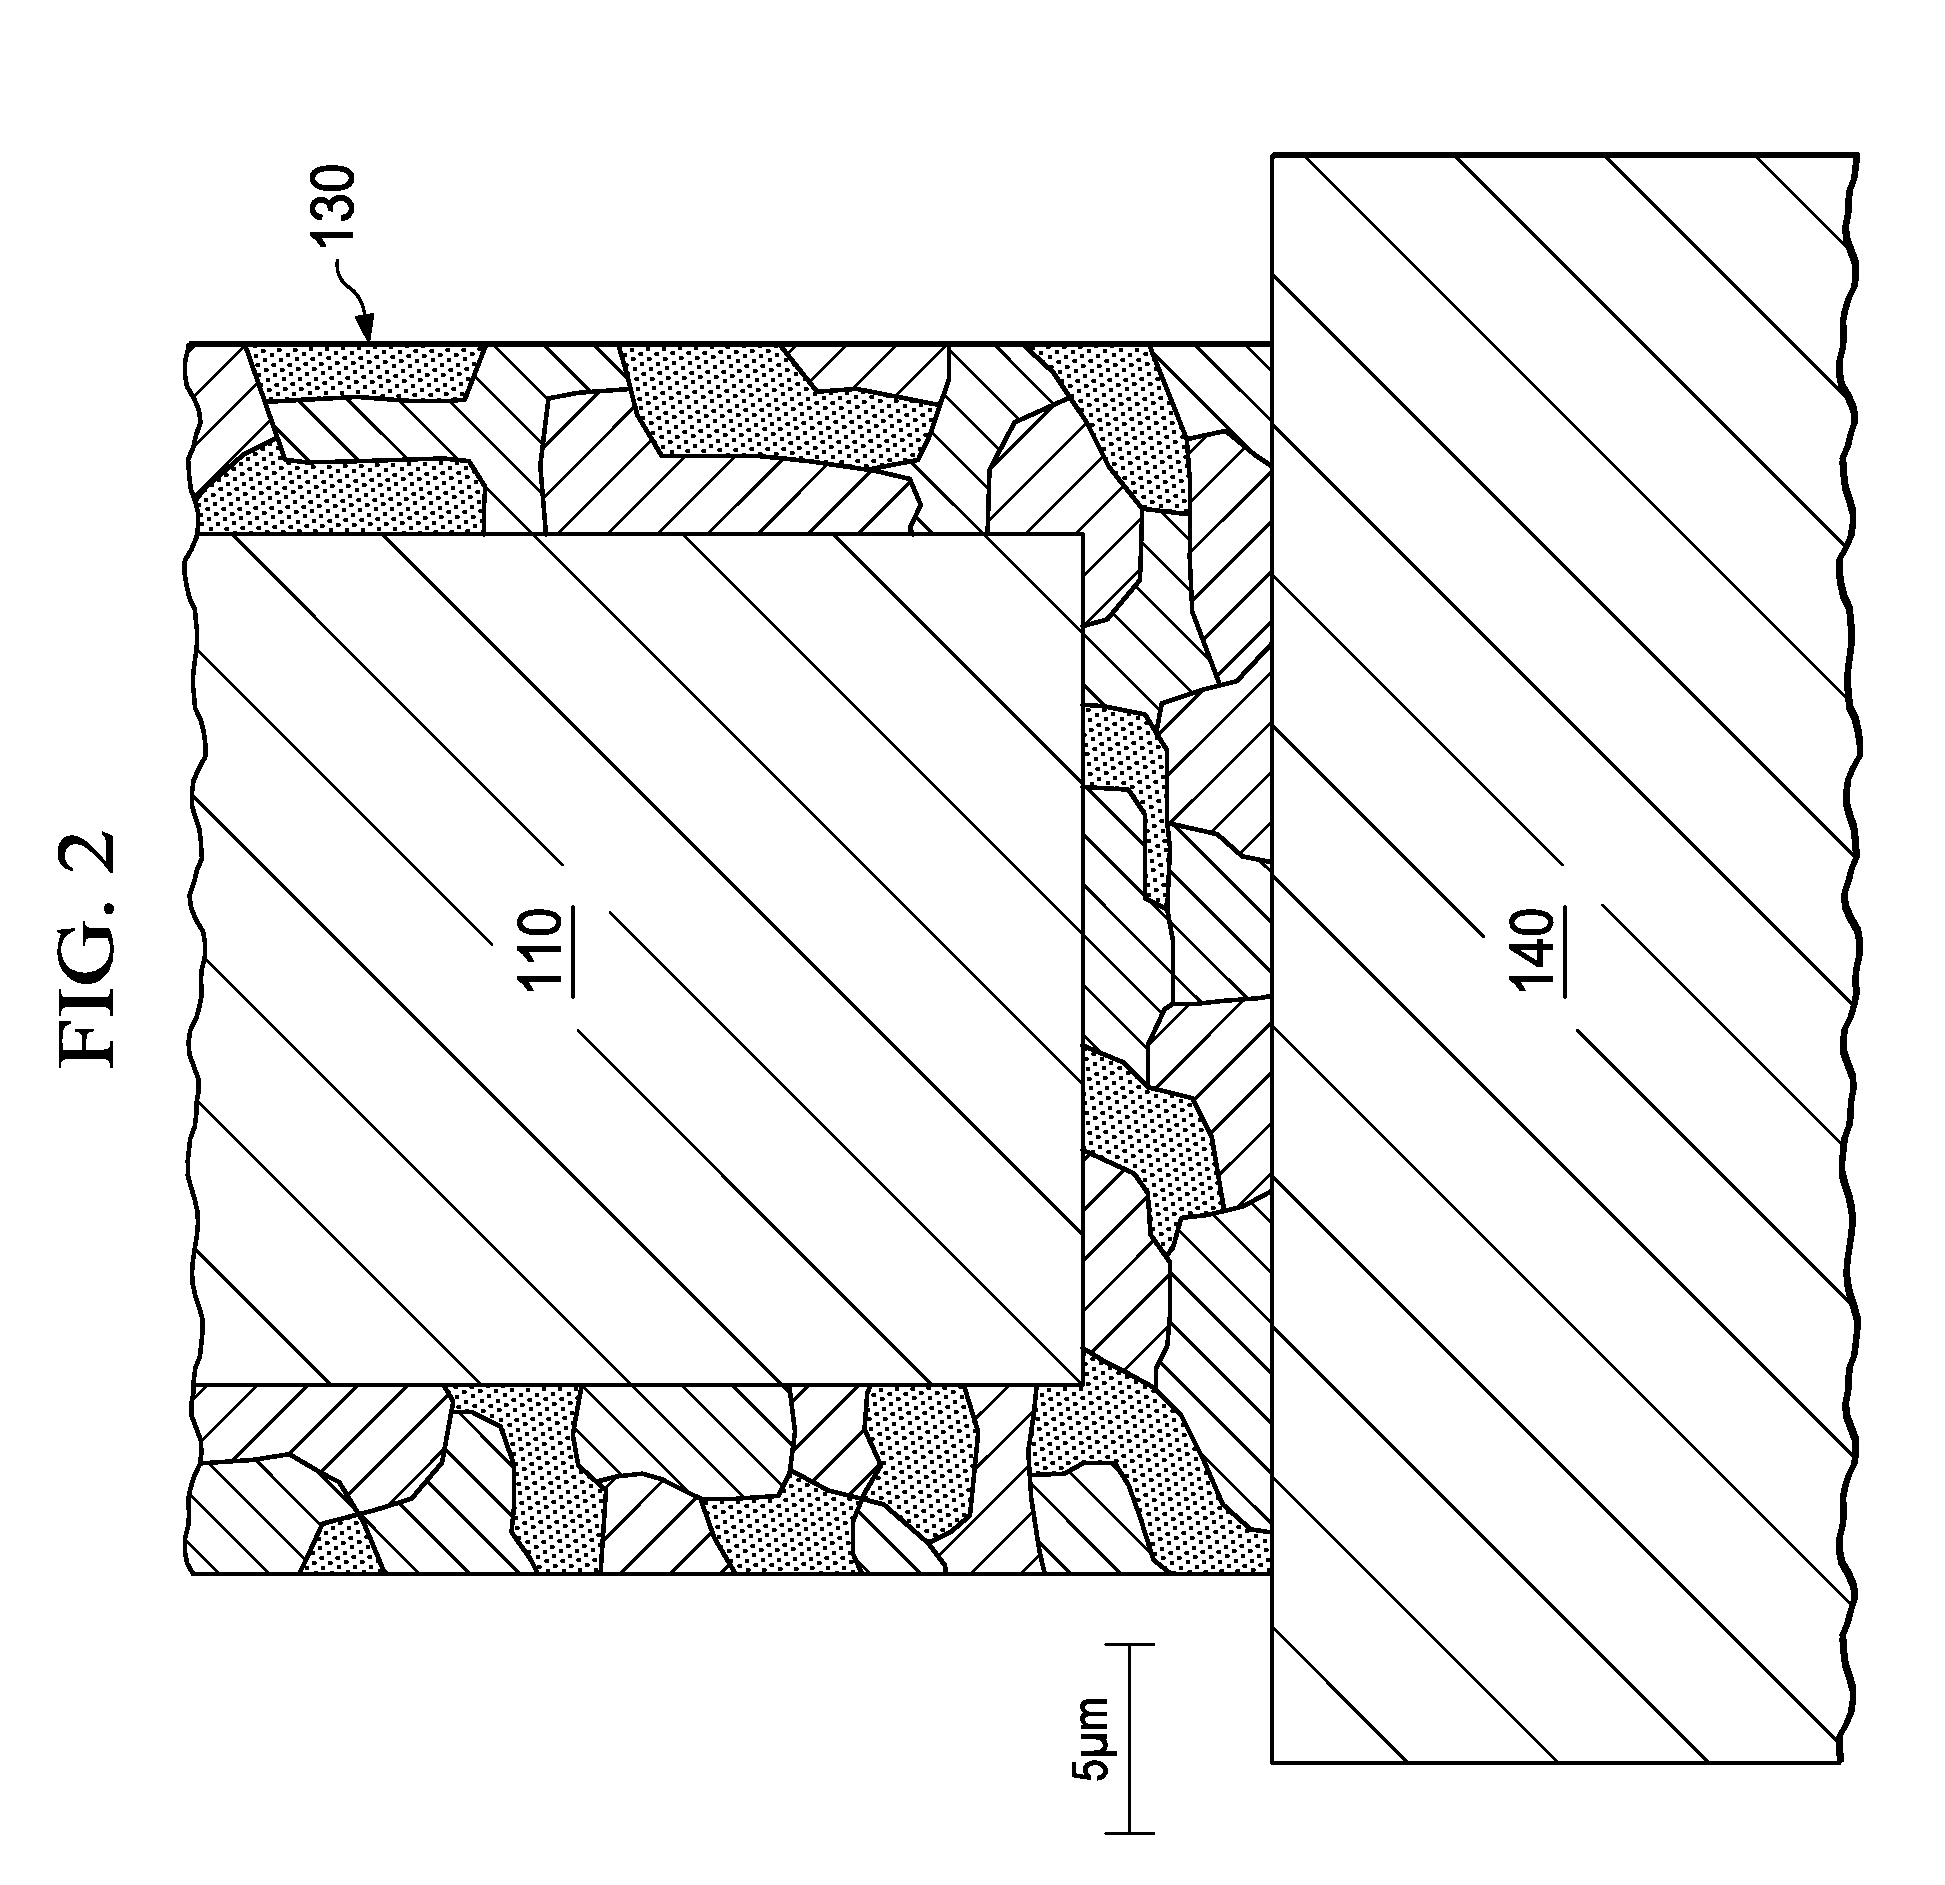 Method for low stress flip-chip assembly of fine-pitch semiconductor devices